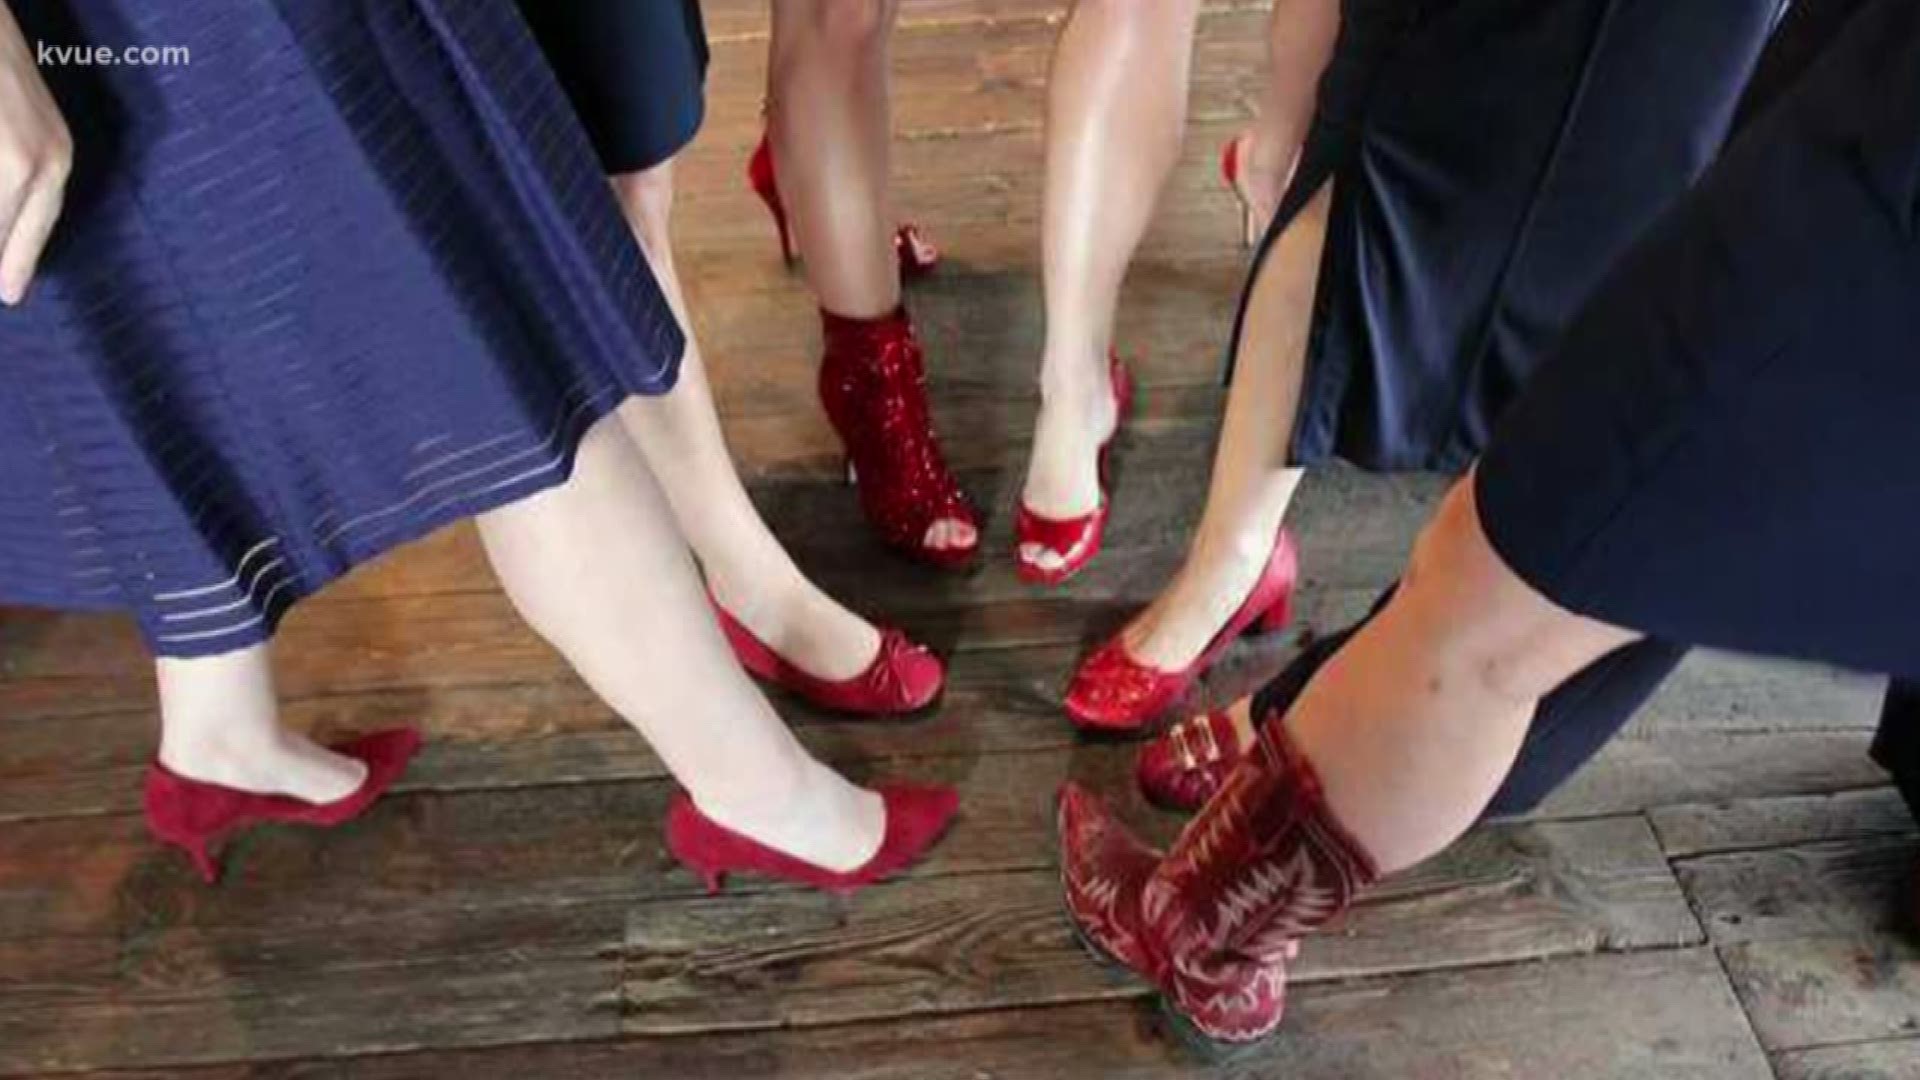 The Ronald McDonald House Charities of Central Texas' annual Red Shoe Luncheon happens Wednesday.